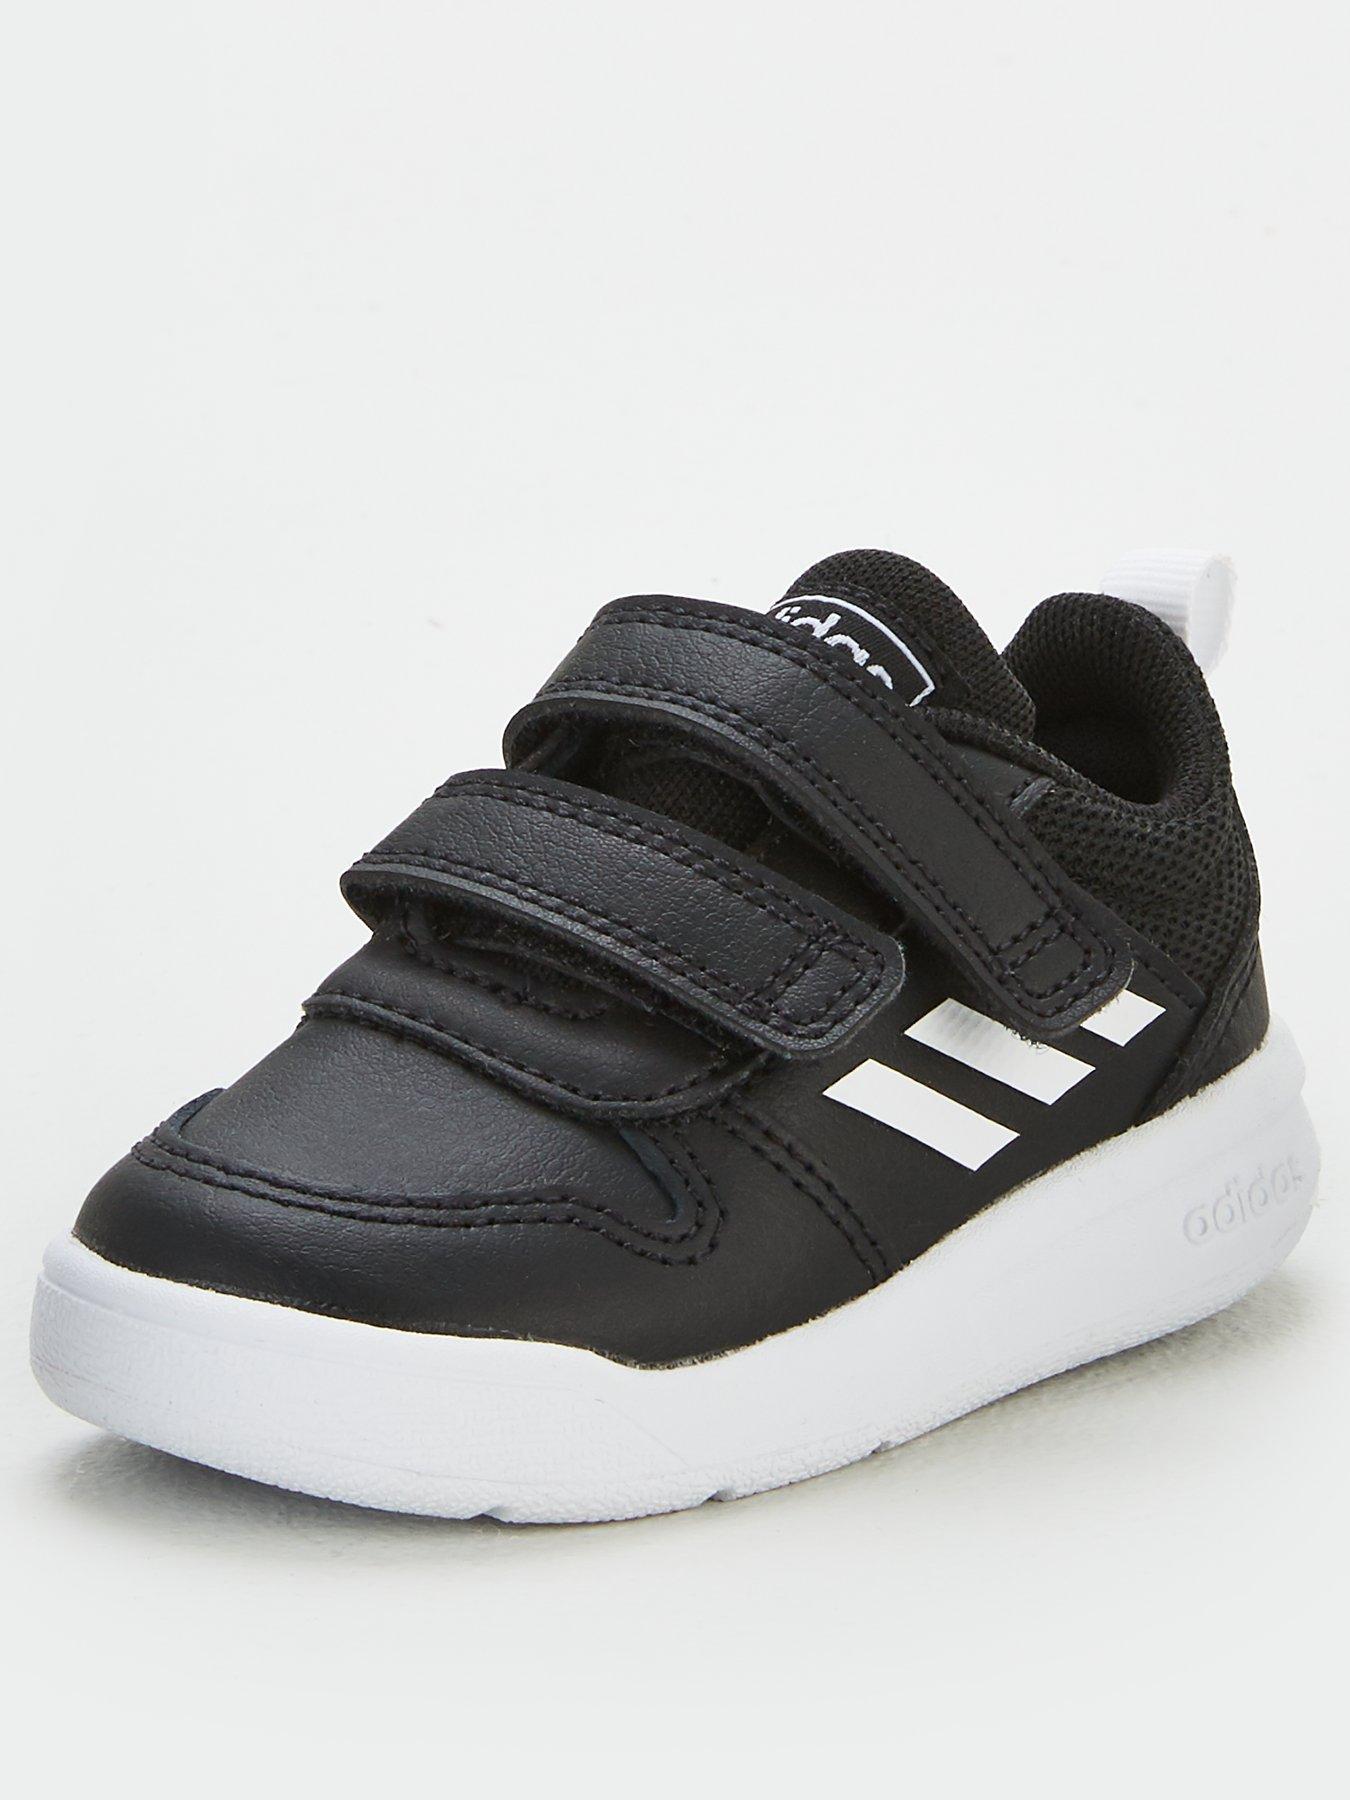 infant size 9 adidas trainers